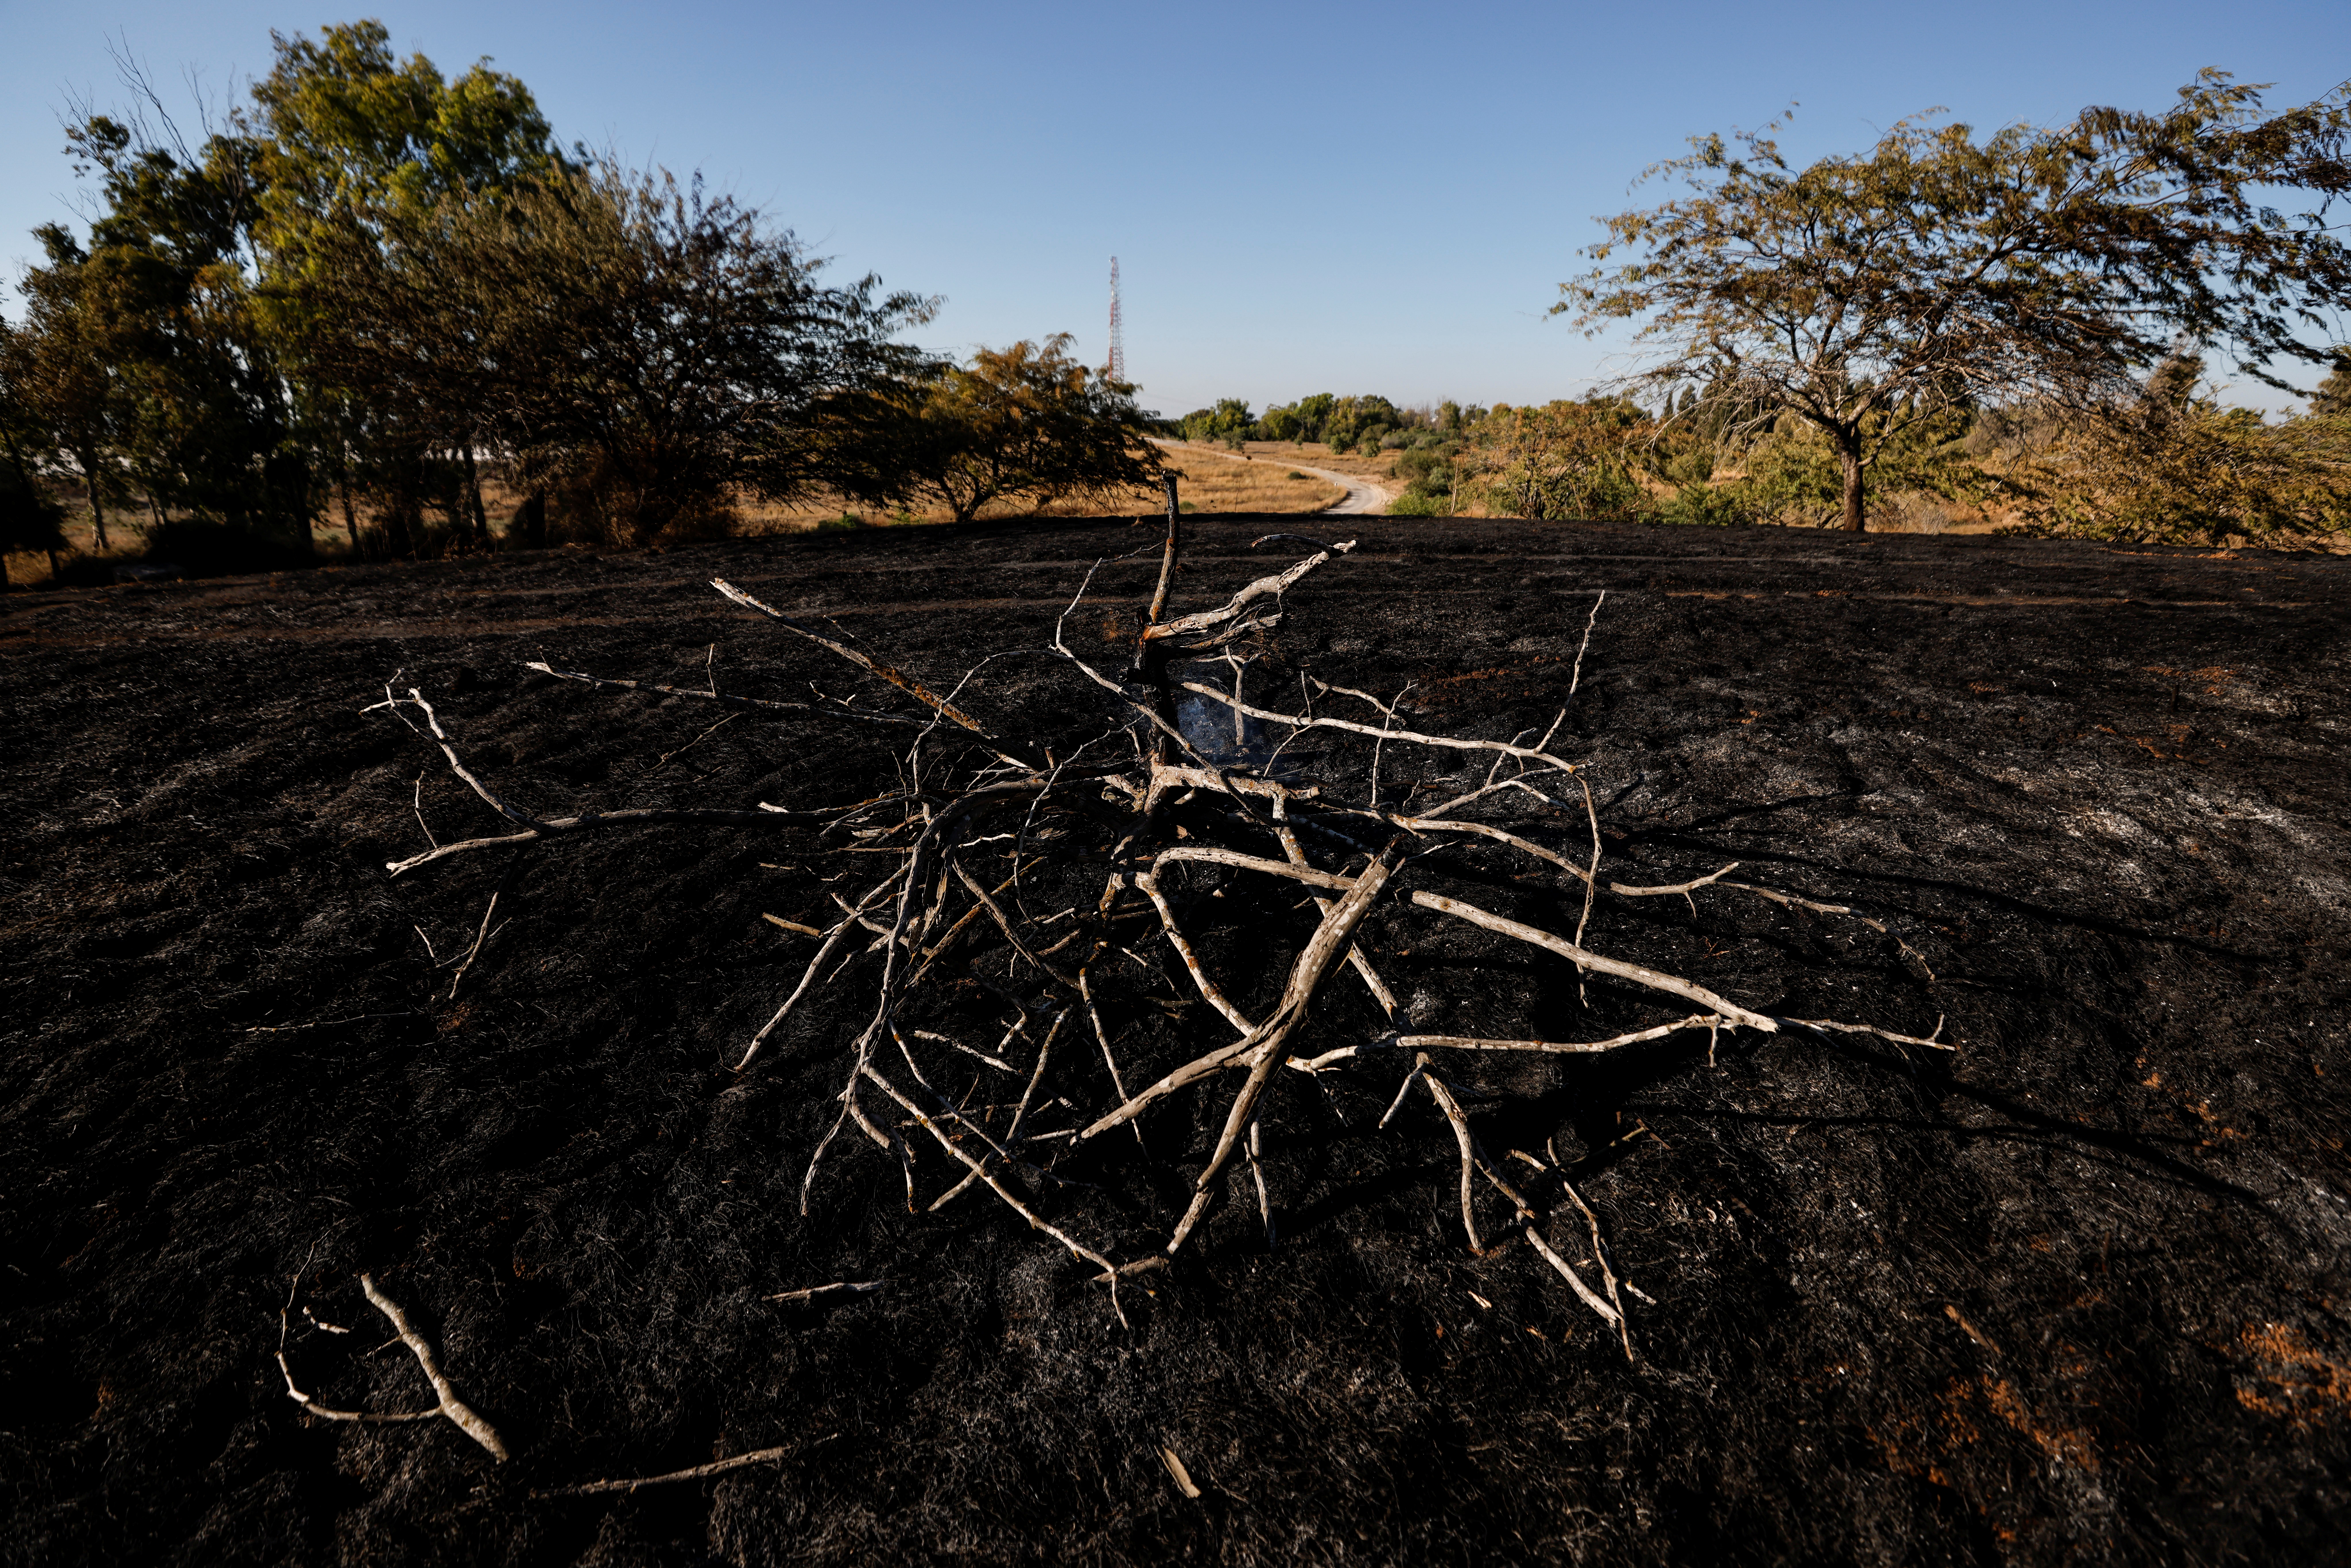 A burned field is seen after Palestinians in Gaza sent incendiary balloons over the border between Gaza and Israel, Near Nir Am June 15,2021. REUTERS/Amir Cohen